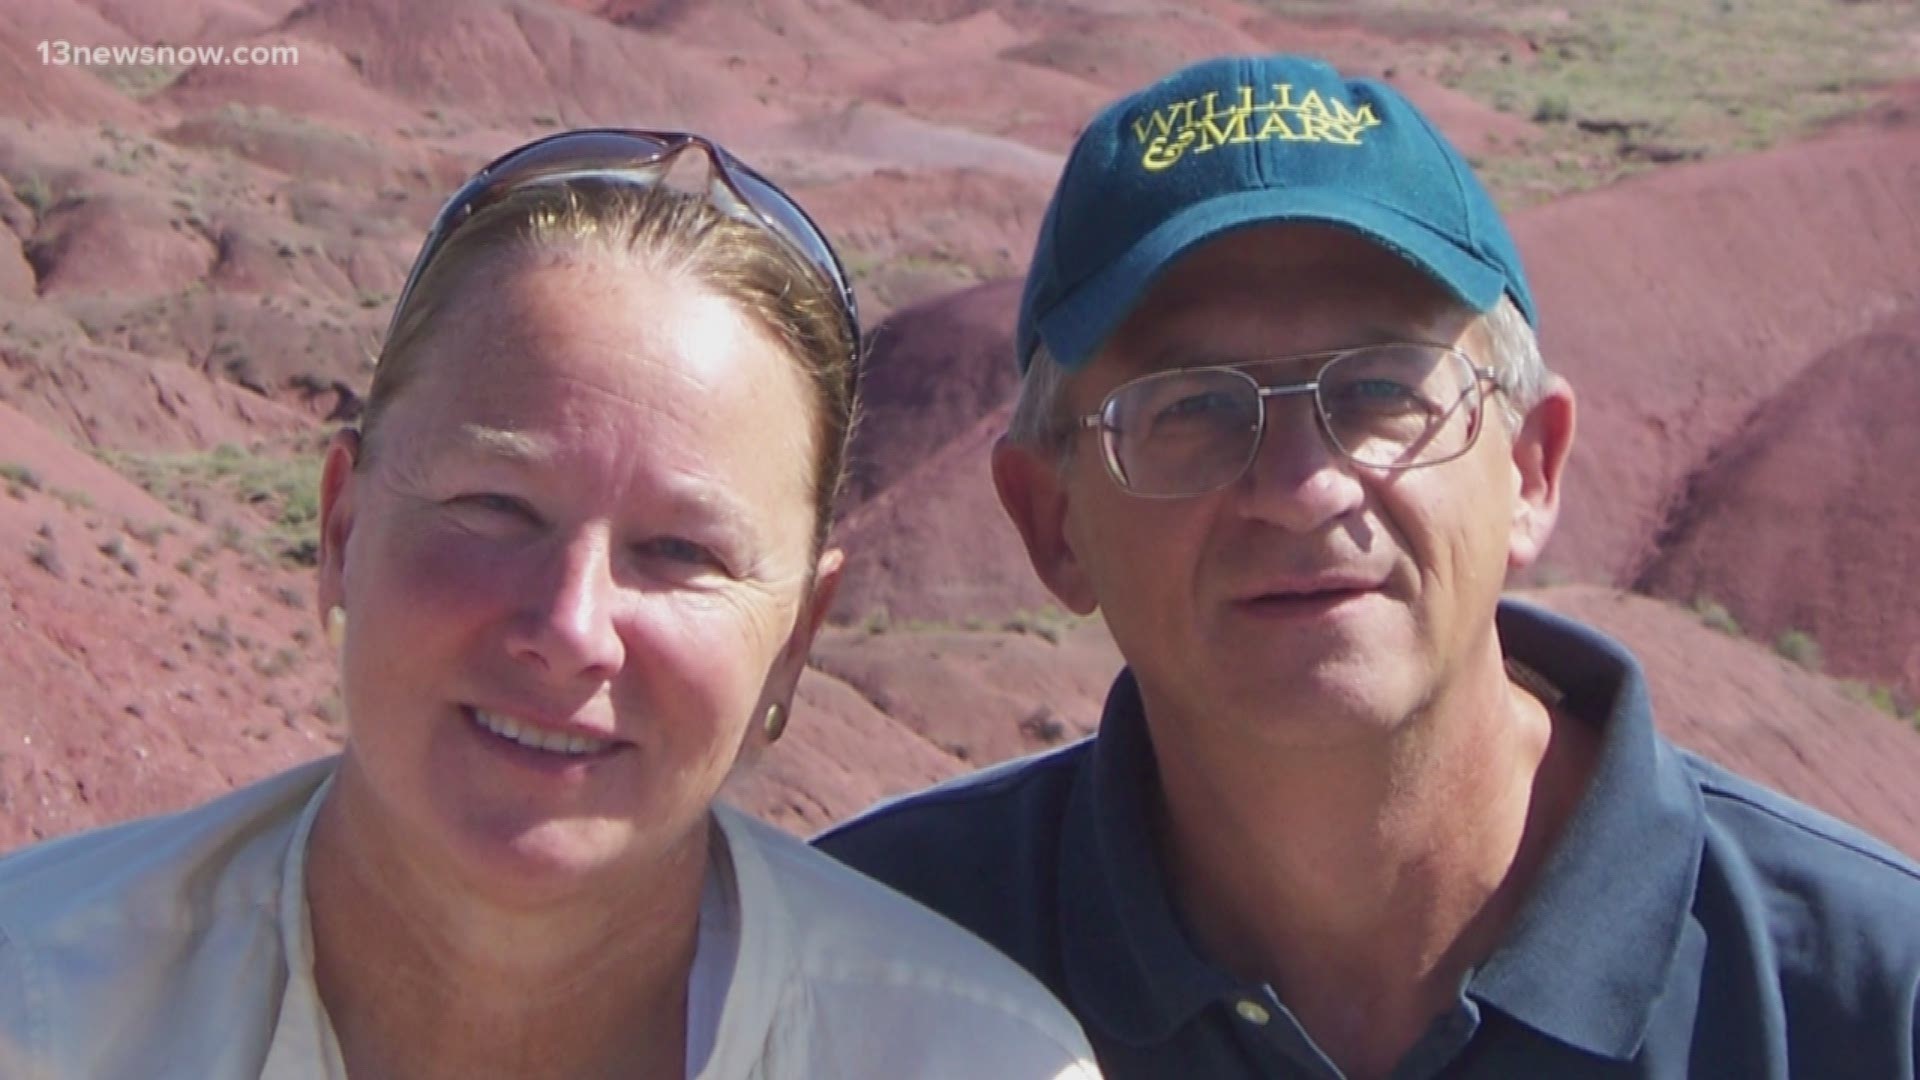 They say Susan and William Schmeirer's car was found at the 'Amboy Crater National Landmark'.